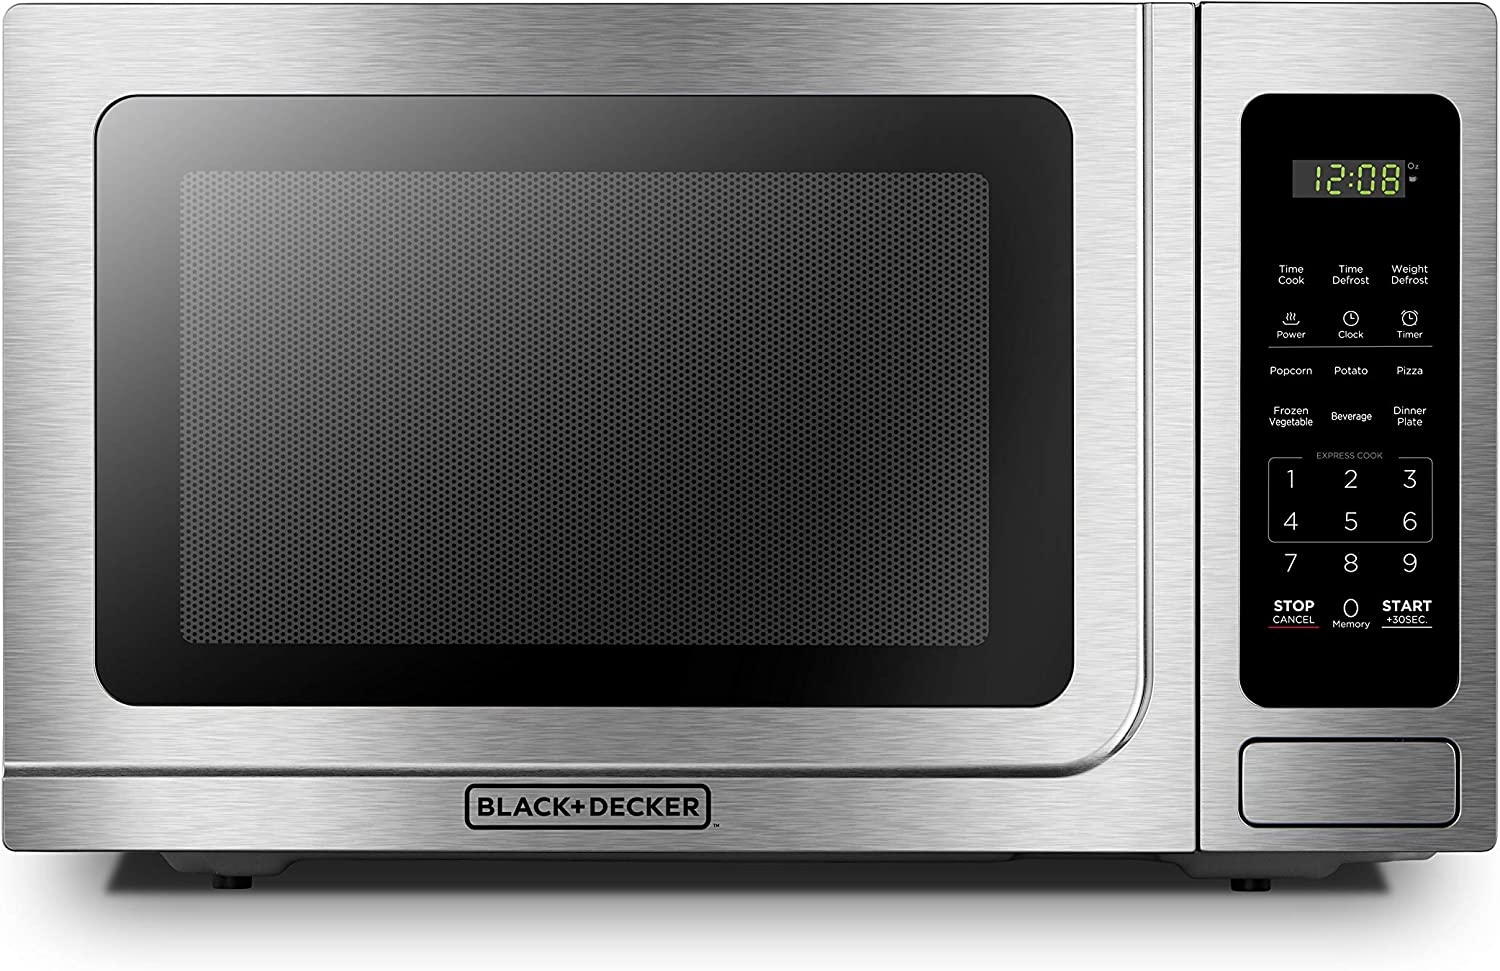 BLACK+DECKER EM036AB14 Digital Microwave Oven with Turntable Push-Button Door, Child Safety Lock, Stainless Steel, 1.4 Cu.ft